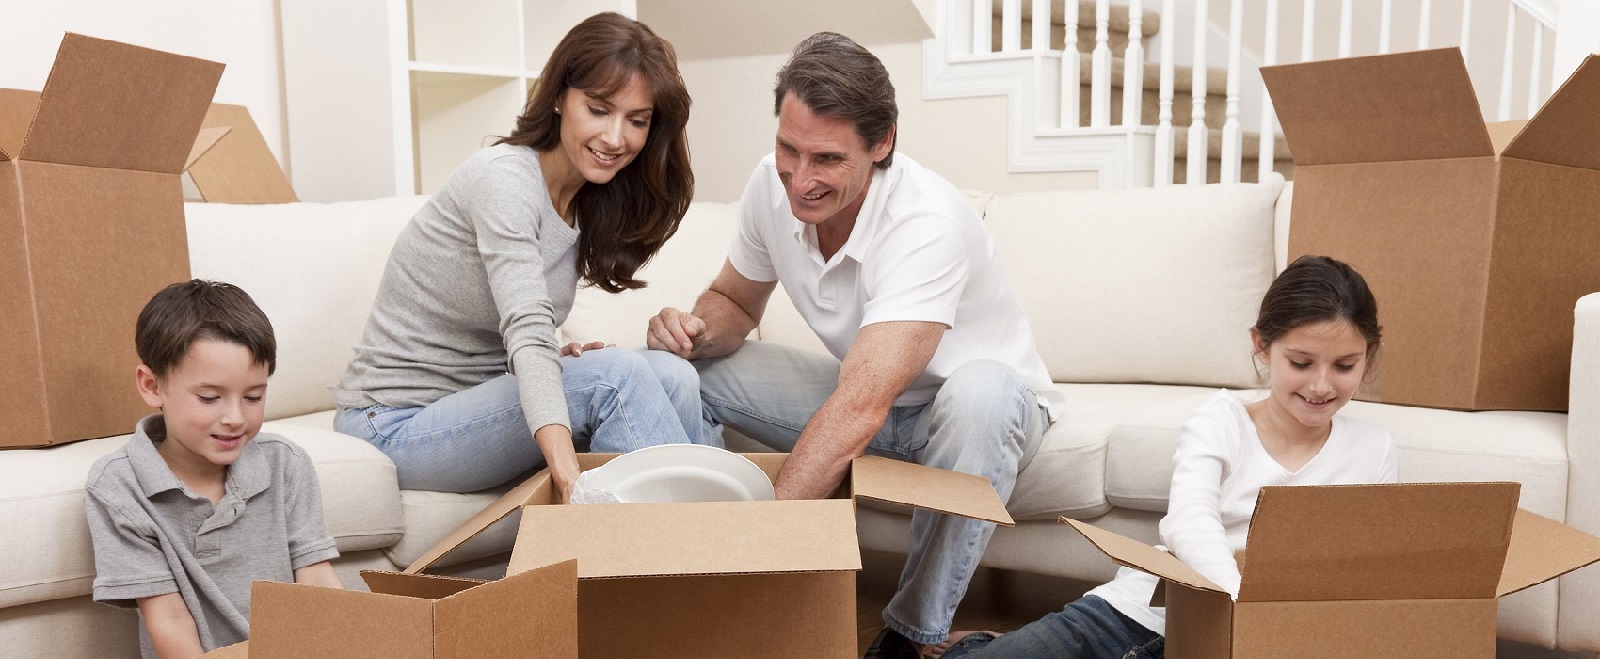 Packers-and-Movers-in-bangalore